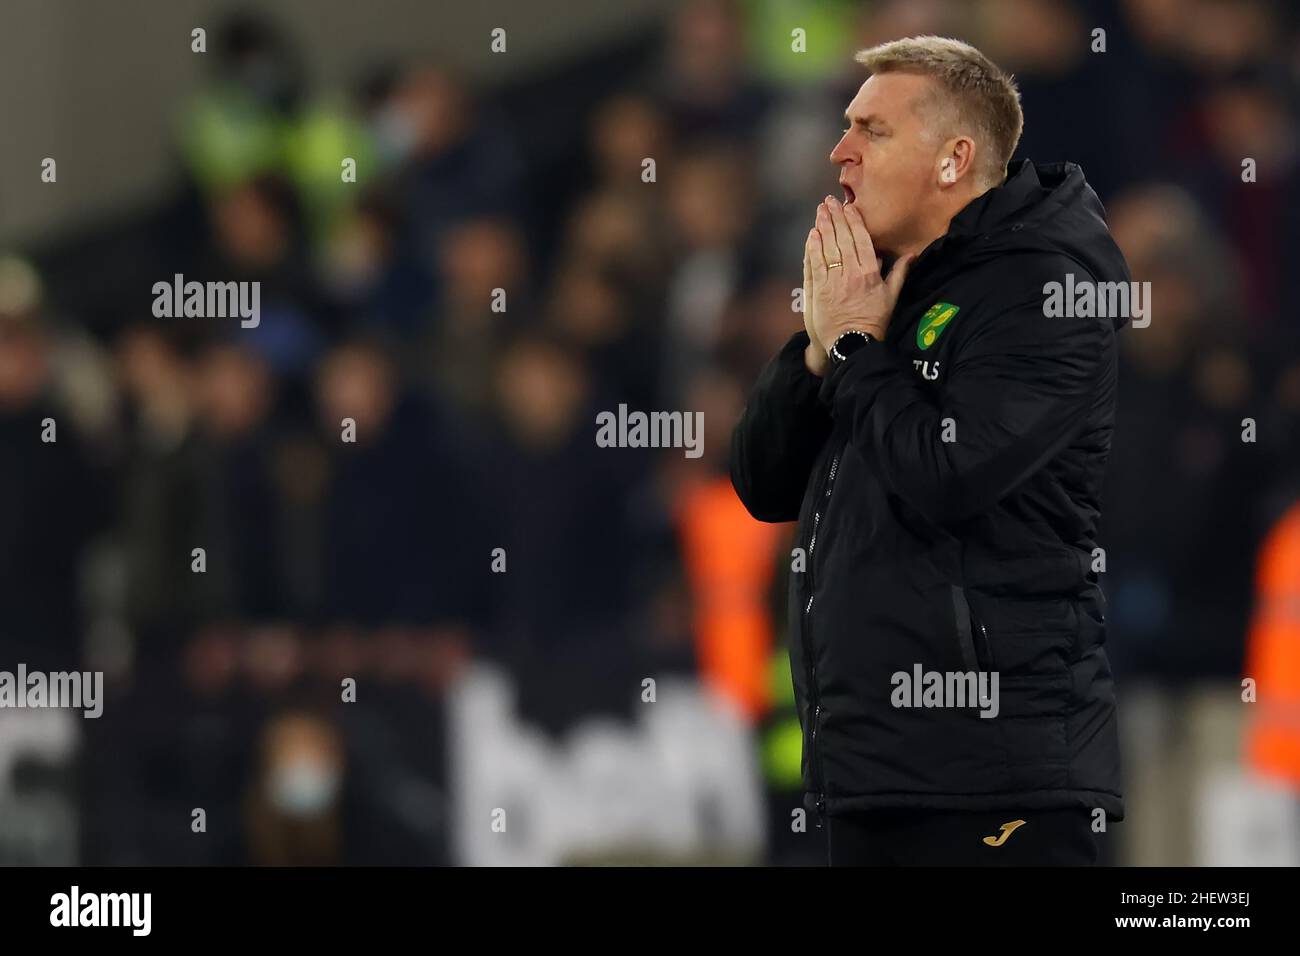 12th January 2022: London Stadium, London, England; Premier League football West Ham versus Norwich; A dejected Norwich City Manager Dean Smith as his team lose 2-0 Stock Photo